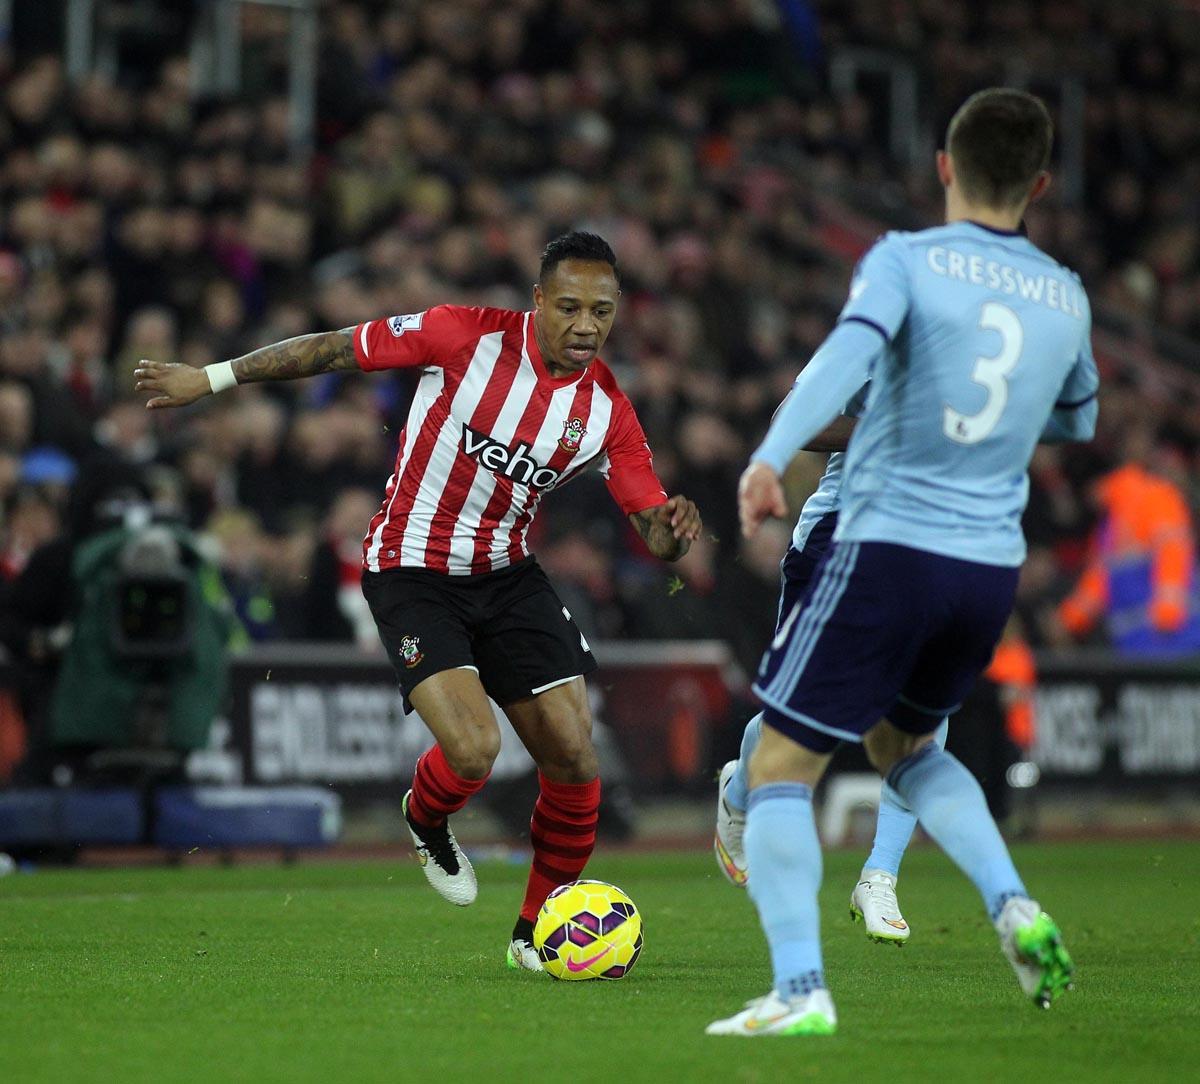 Pictures from Saints 0-0 draw against West Ham